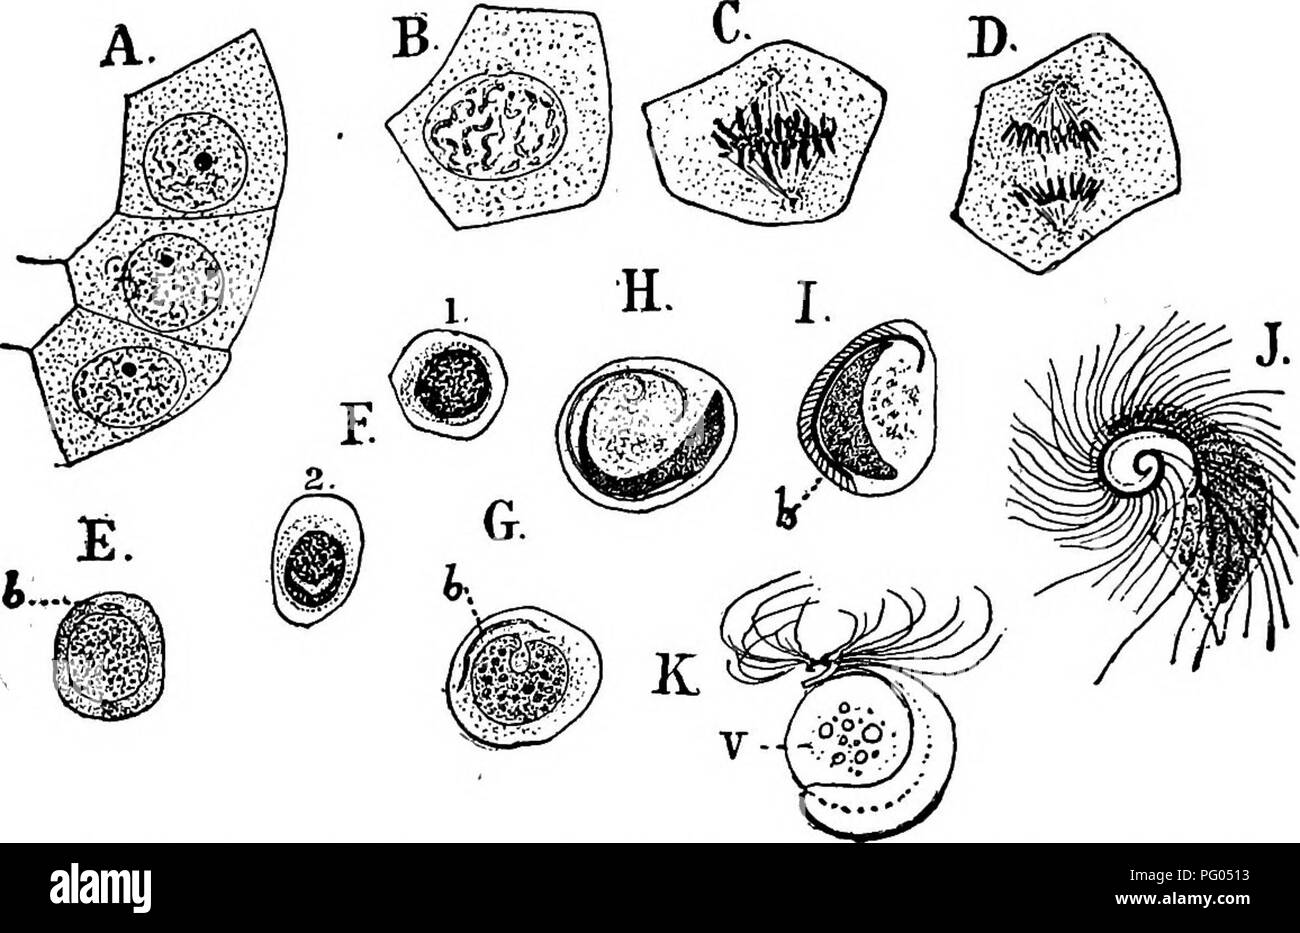 . The structure and development of mosses and ferns (Archegoniatae). Plant morphology; Mosses; Ferns. MOSSES AND FERNS CHAP. a nearer connection of these two groups than is usually admitted. As in the eusporangiate Ferns, the antheridium mother cell is divided into an inner and an outer cell of which the inner one forms at once the sperm cells. When the antheridium arises at' the end of a filament, the divisions in the terminal cell are very much like those in Osmunda. In the mother cell three intersect- ing walls enclose a tetrahedral cell, which then has the cover cell cut ofif by a periclin Stock Photo